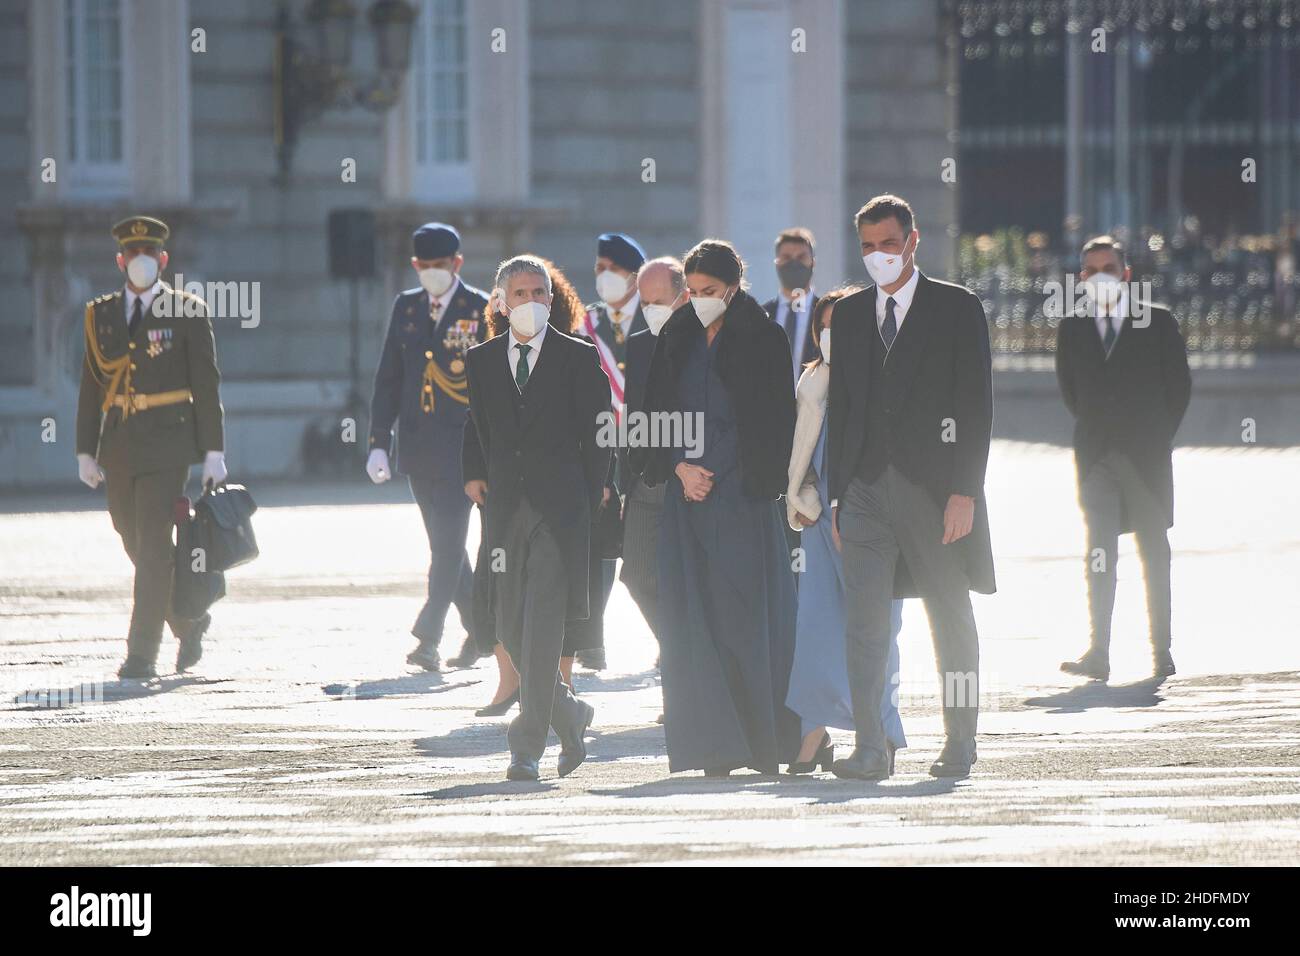 Madrid. Spain. 20220106,  Queen Letizia of Spain, Pedro Sanchez, Prime Minister, Margarita Robles, Fernando Grande Marlaska attends New Year's Military Parade 2022 at Royal Palace on January 6, 2022 in Madrid, Spain Credit: MPG/Alamy Live News Stock Photo